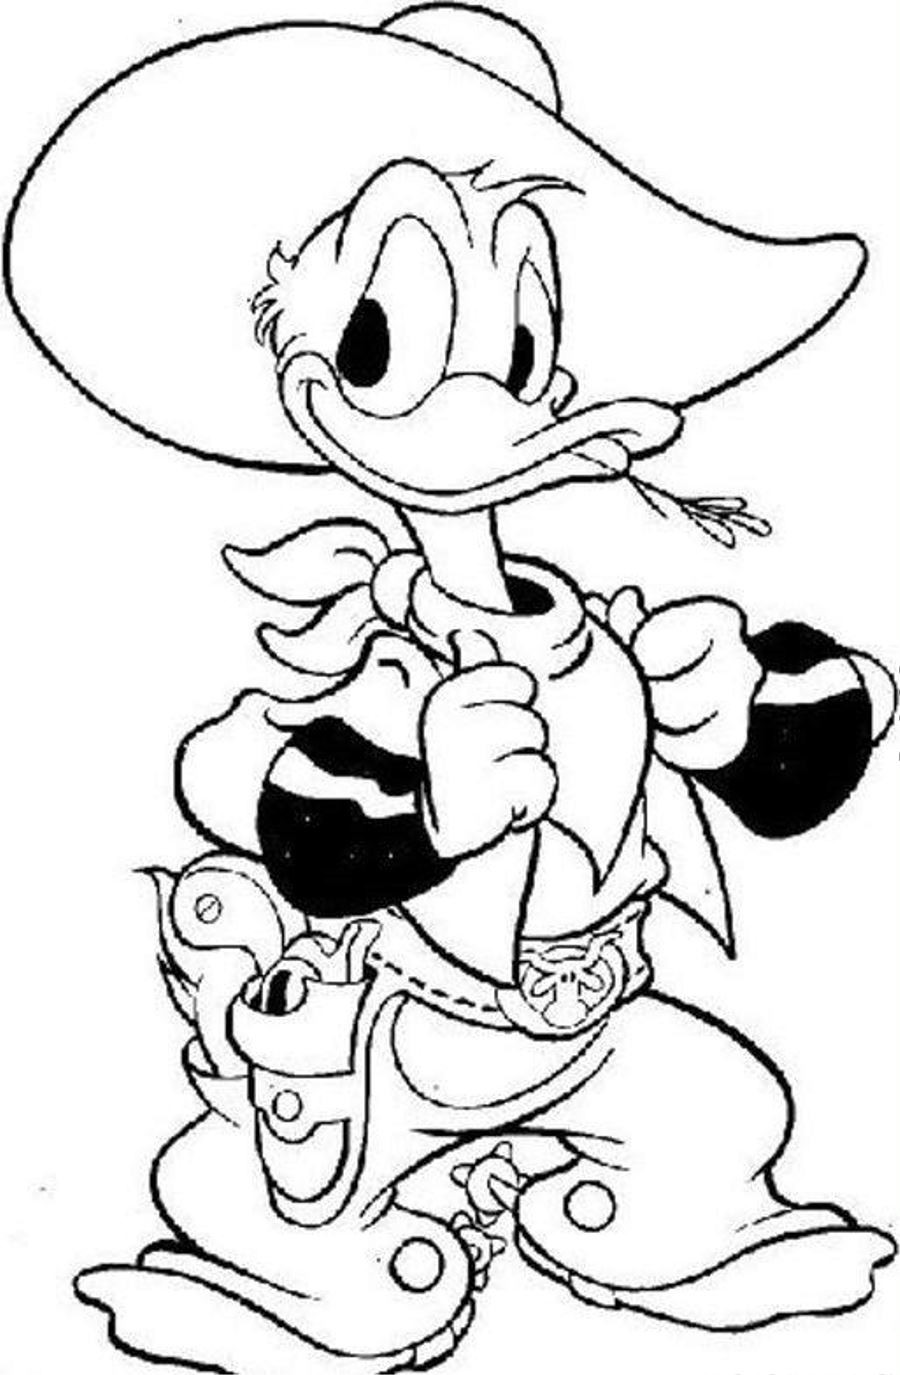 Cowboy And Cowgirl Coloring Pages
 Cowboy Coloring Pages